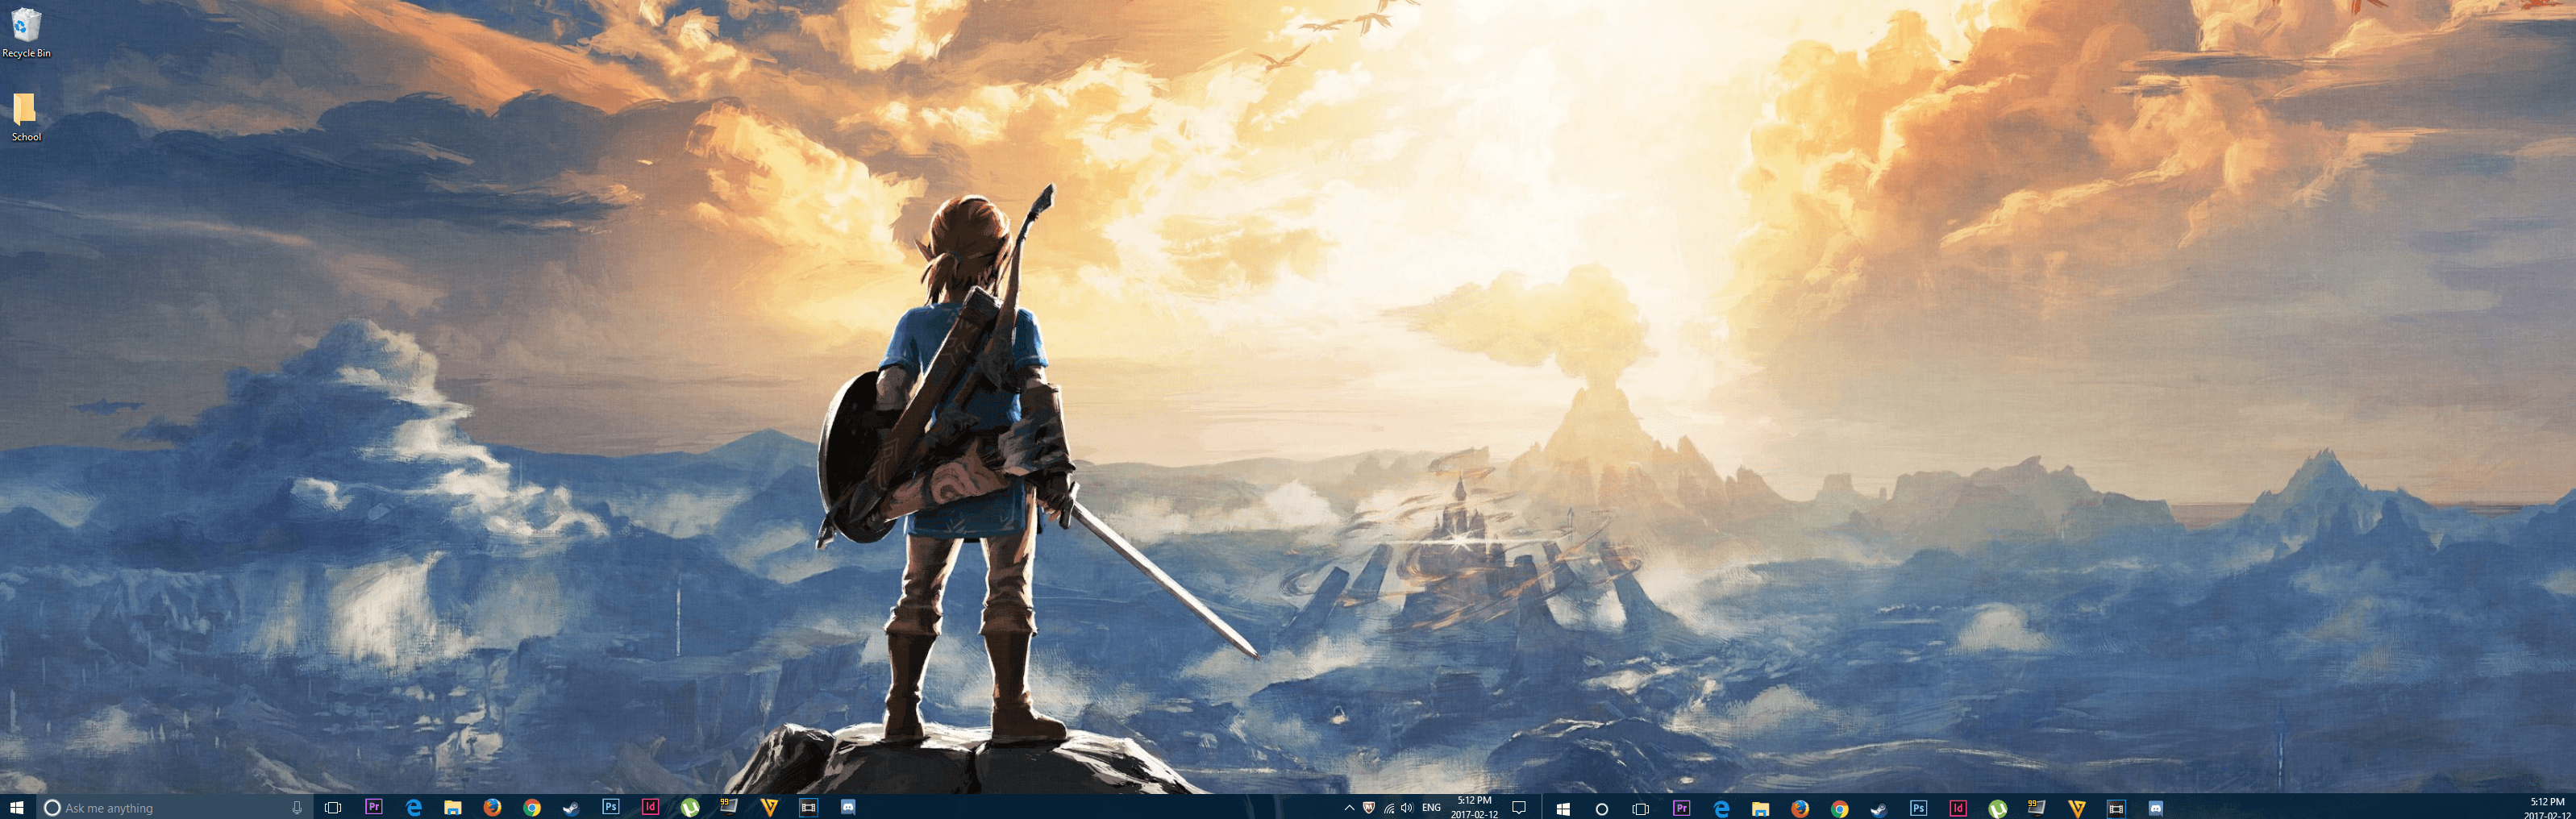 Dual Monitor Breath Of The Wild Wallpaper Looking Pretty Sweet!